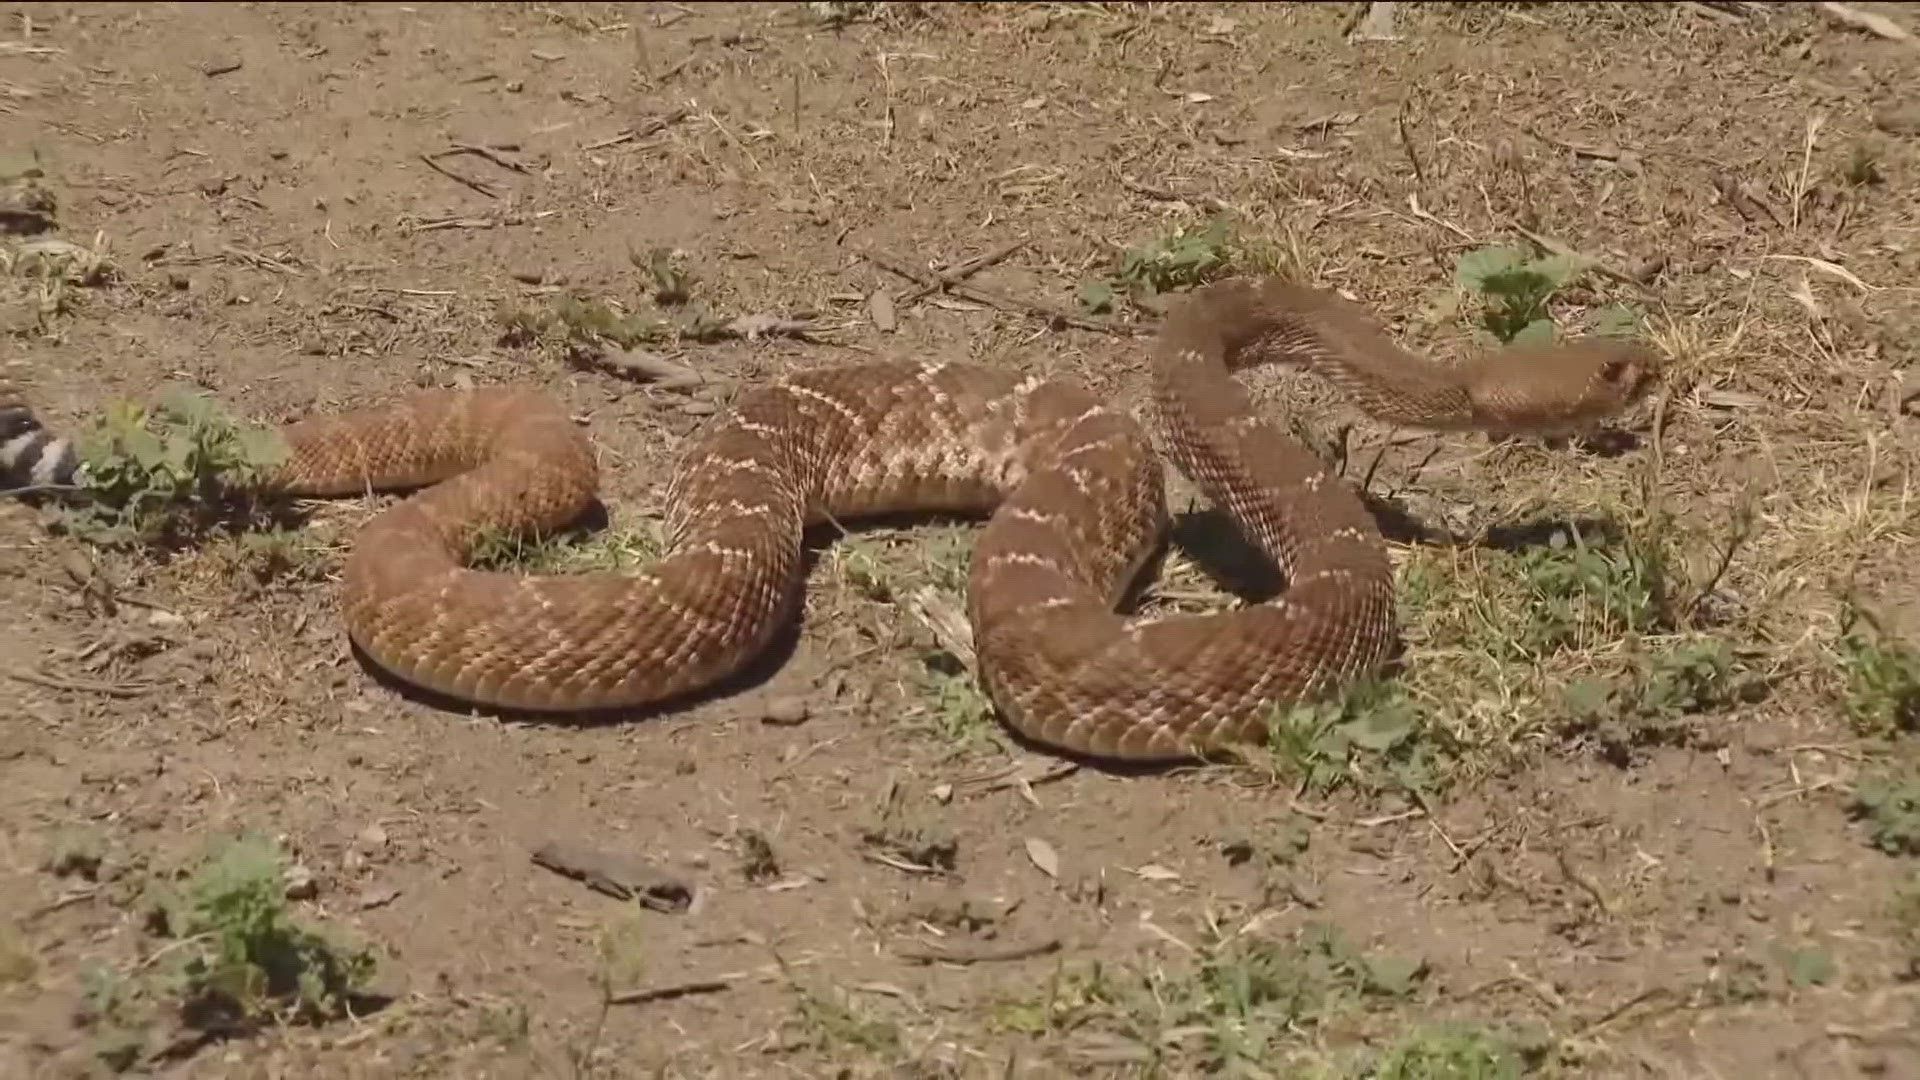 A rattlesnake is laying on the ground in the dirt.